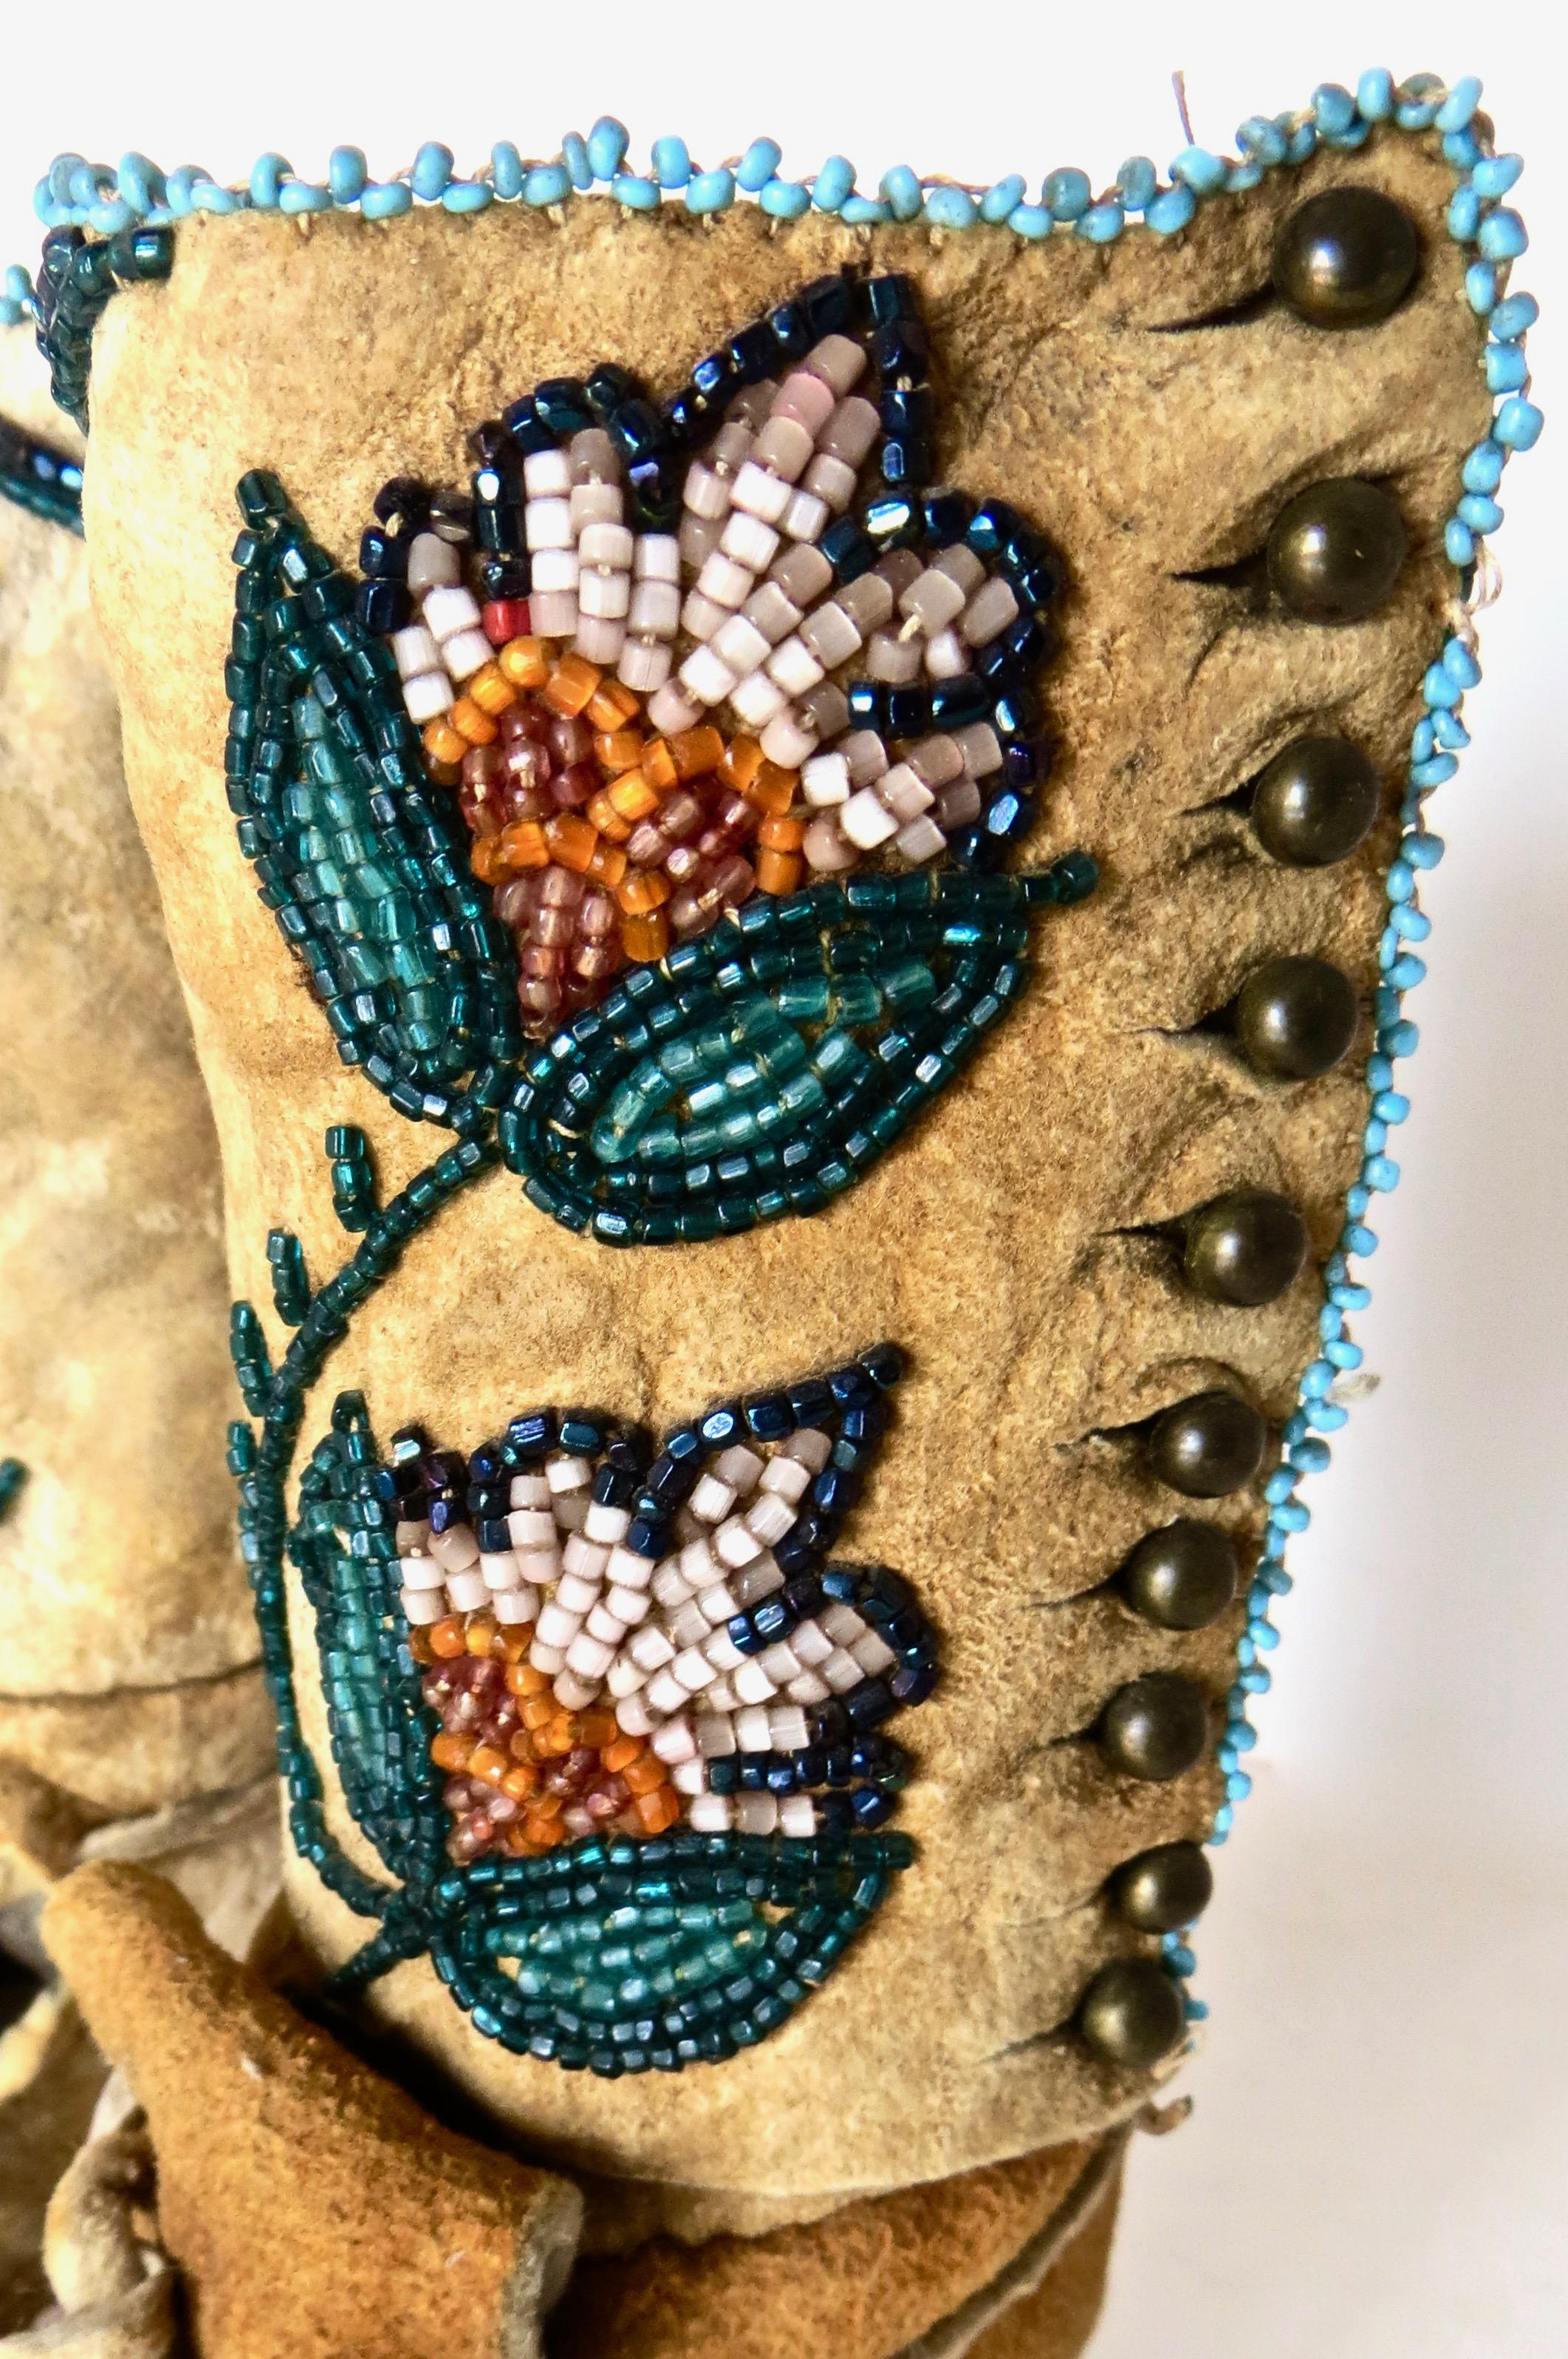 Native American Indian, probably Shoshone, these high top children’s moccasins are intricately constructed with delicate bead work and fine tanned leather with great attention to detail. They were made in the late 19th century, not for the tourist